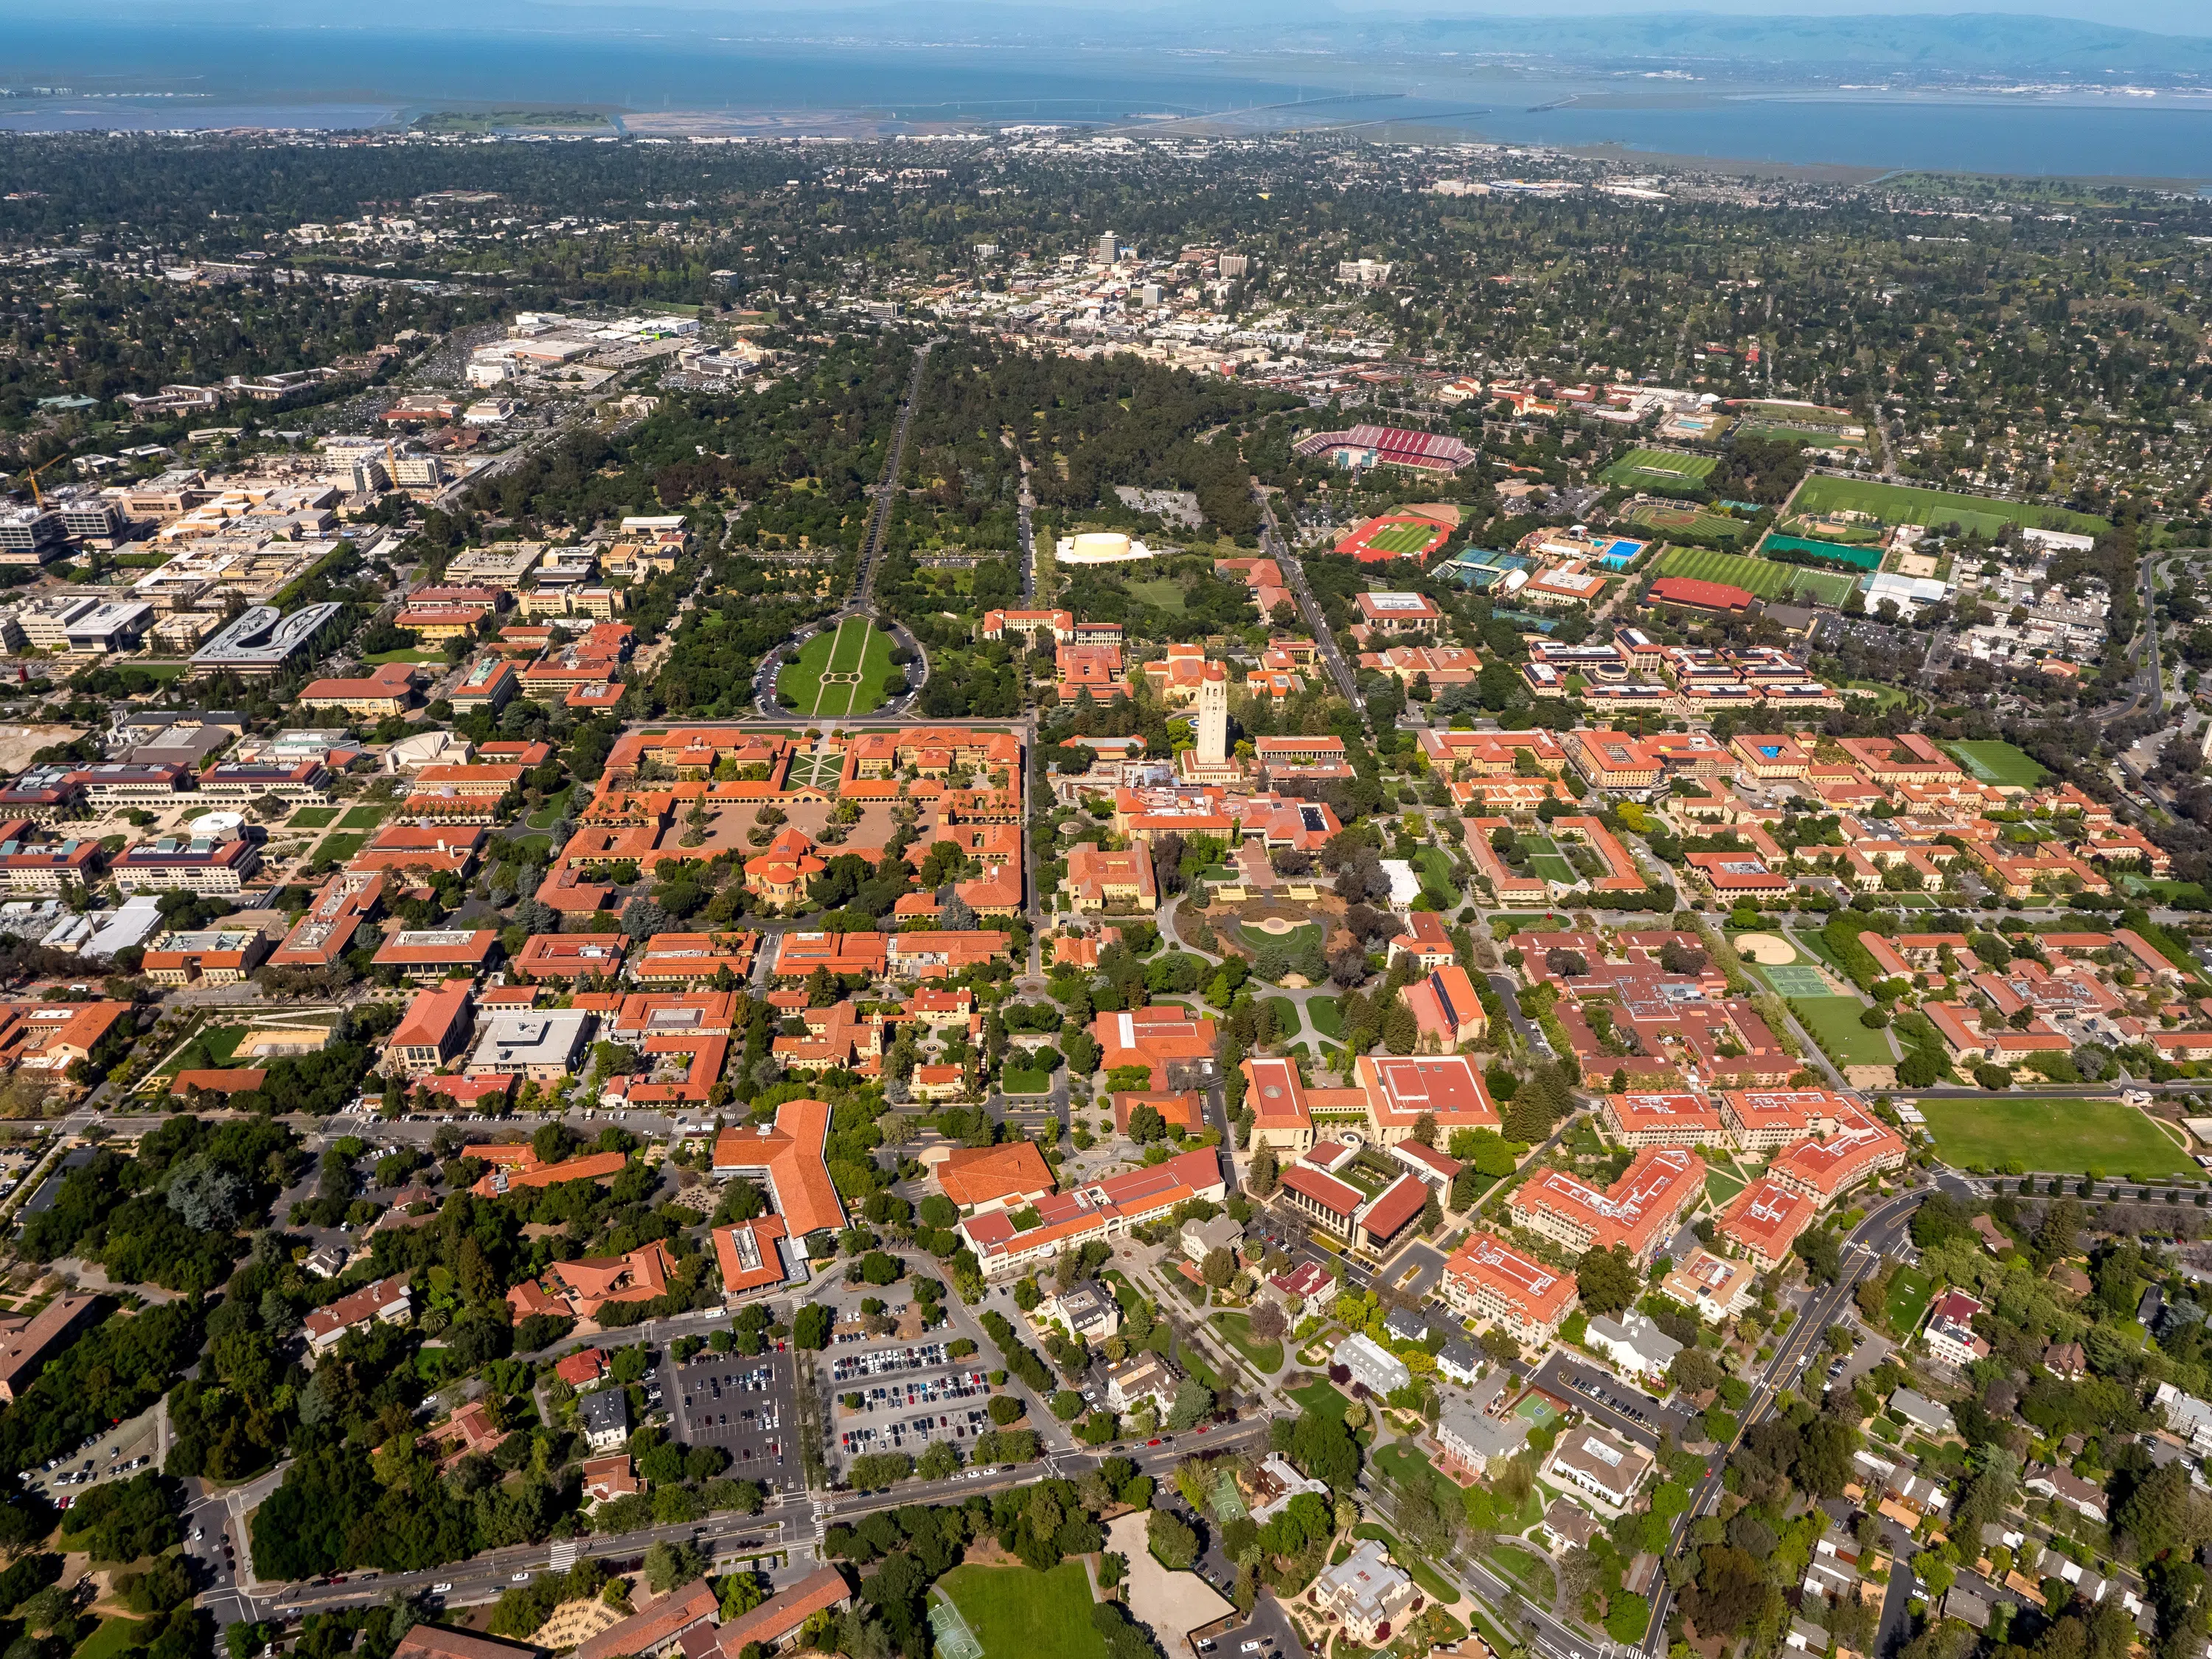 Aerial view of the central campus area of the main Stanford campus, including adjacent communities and San Francisco Bay in background